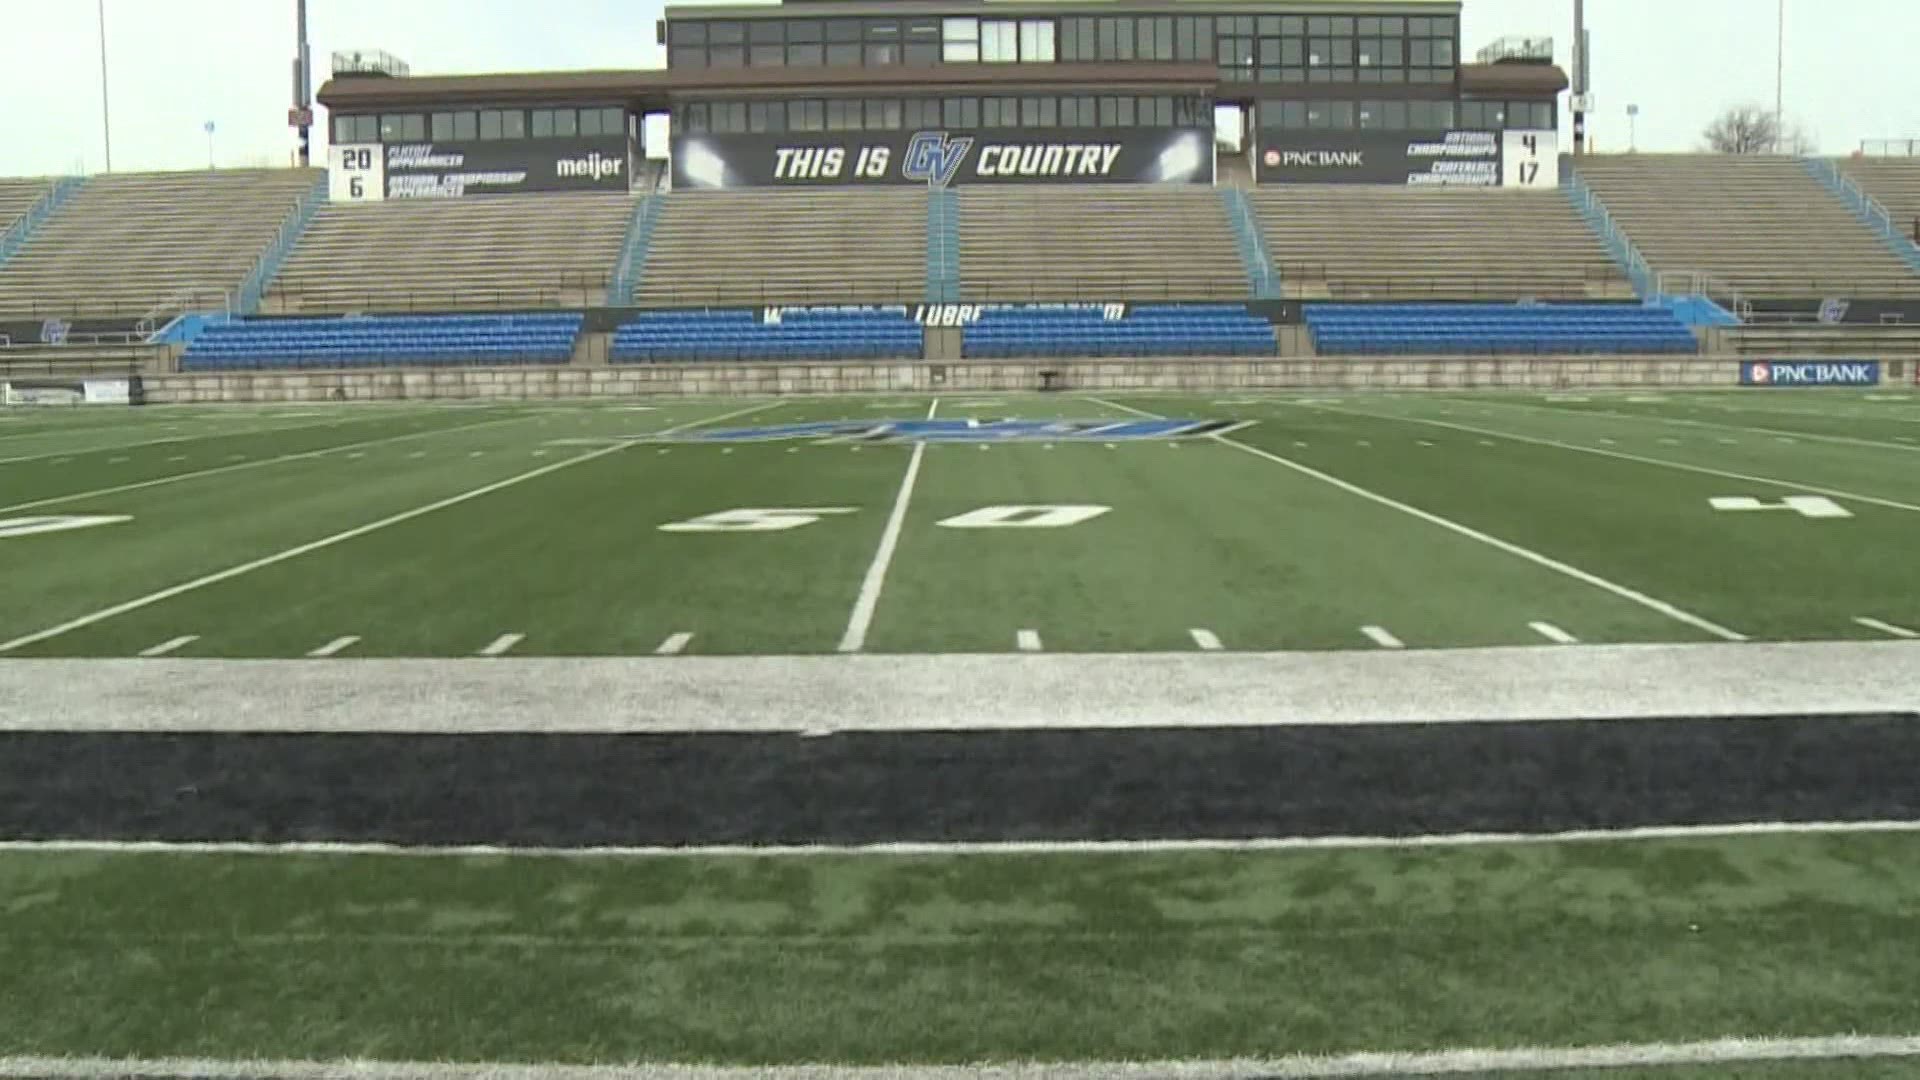 Members of the GLIAC plan to reconvene in early August to reevaluate options and the possibility of having a fall 2020 sports season.